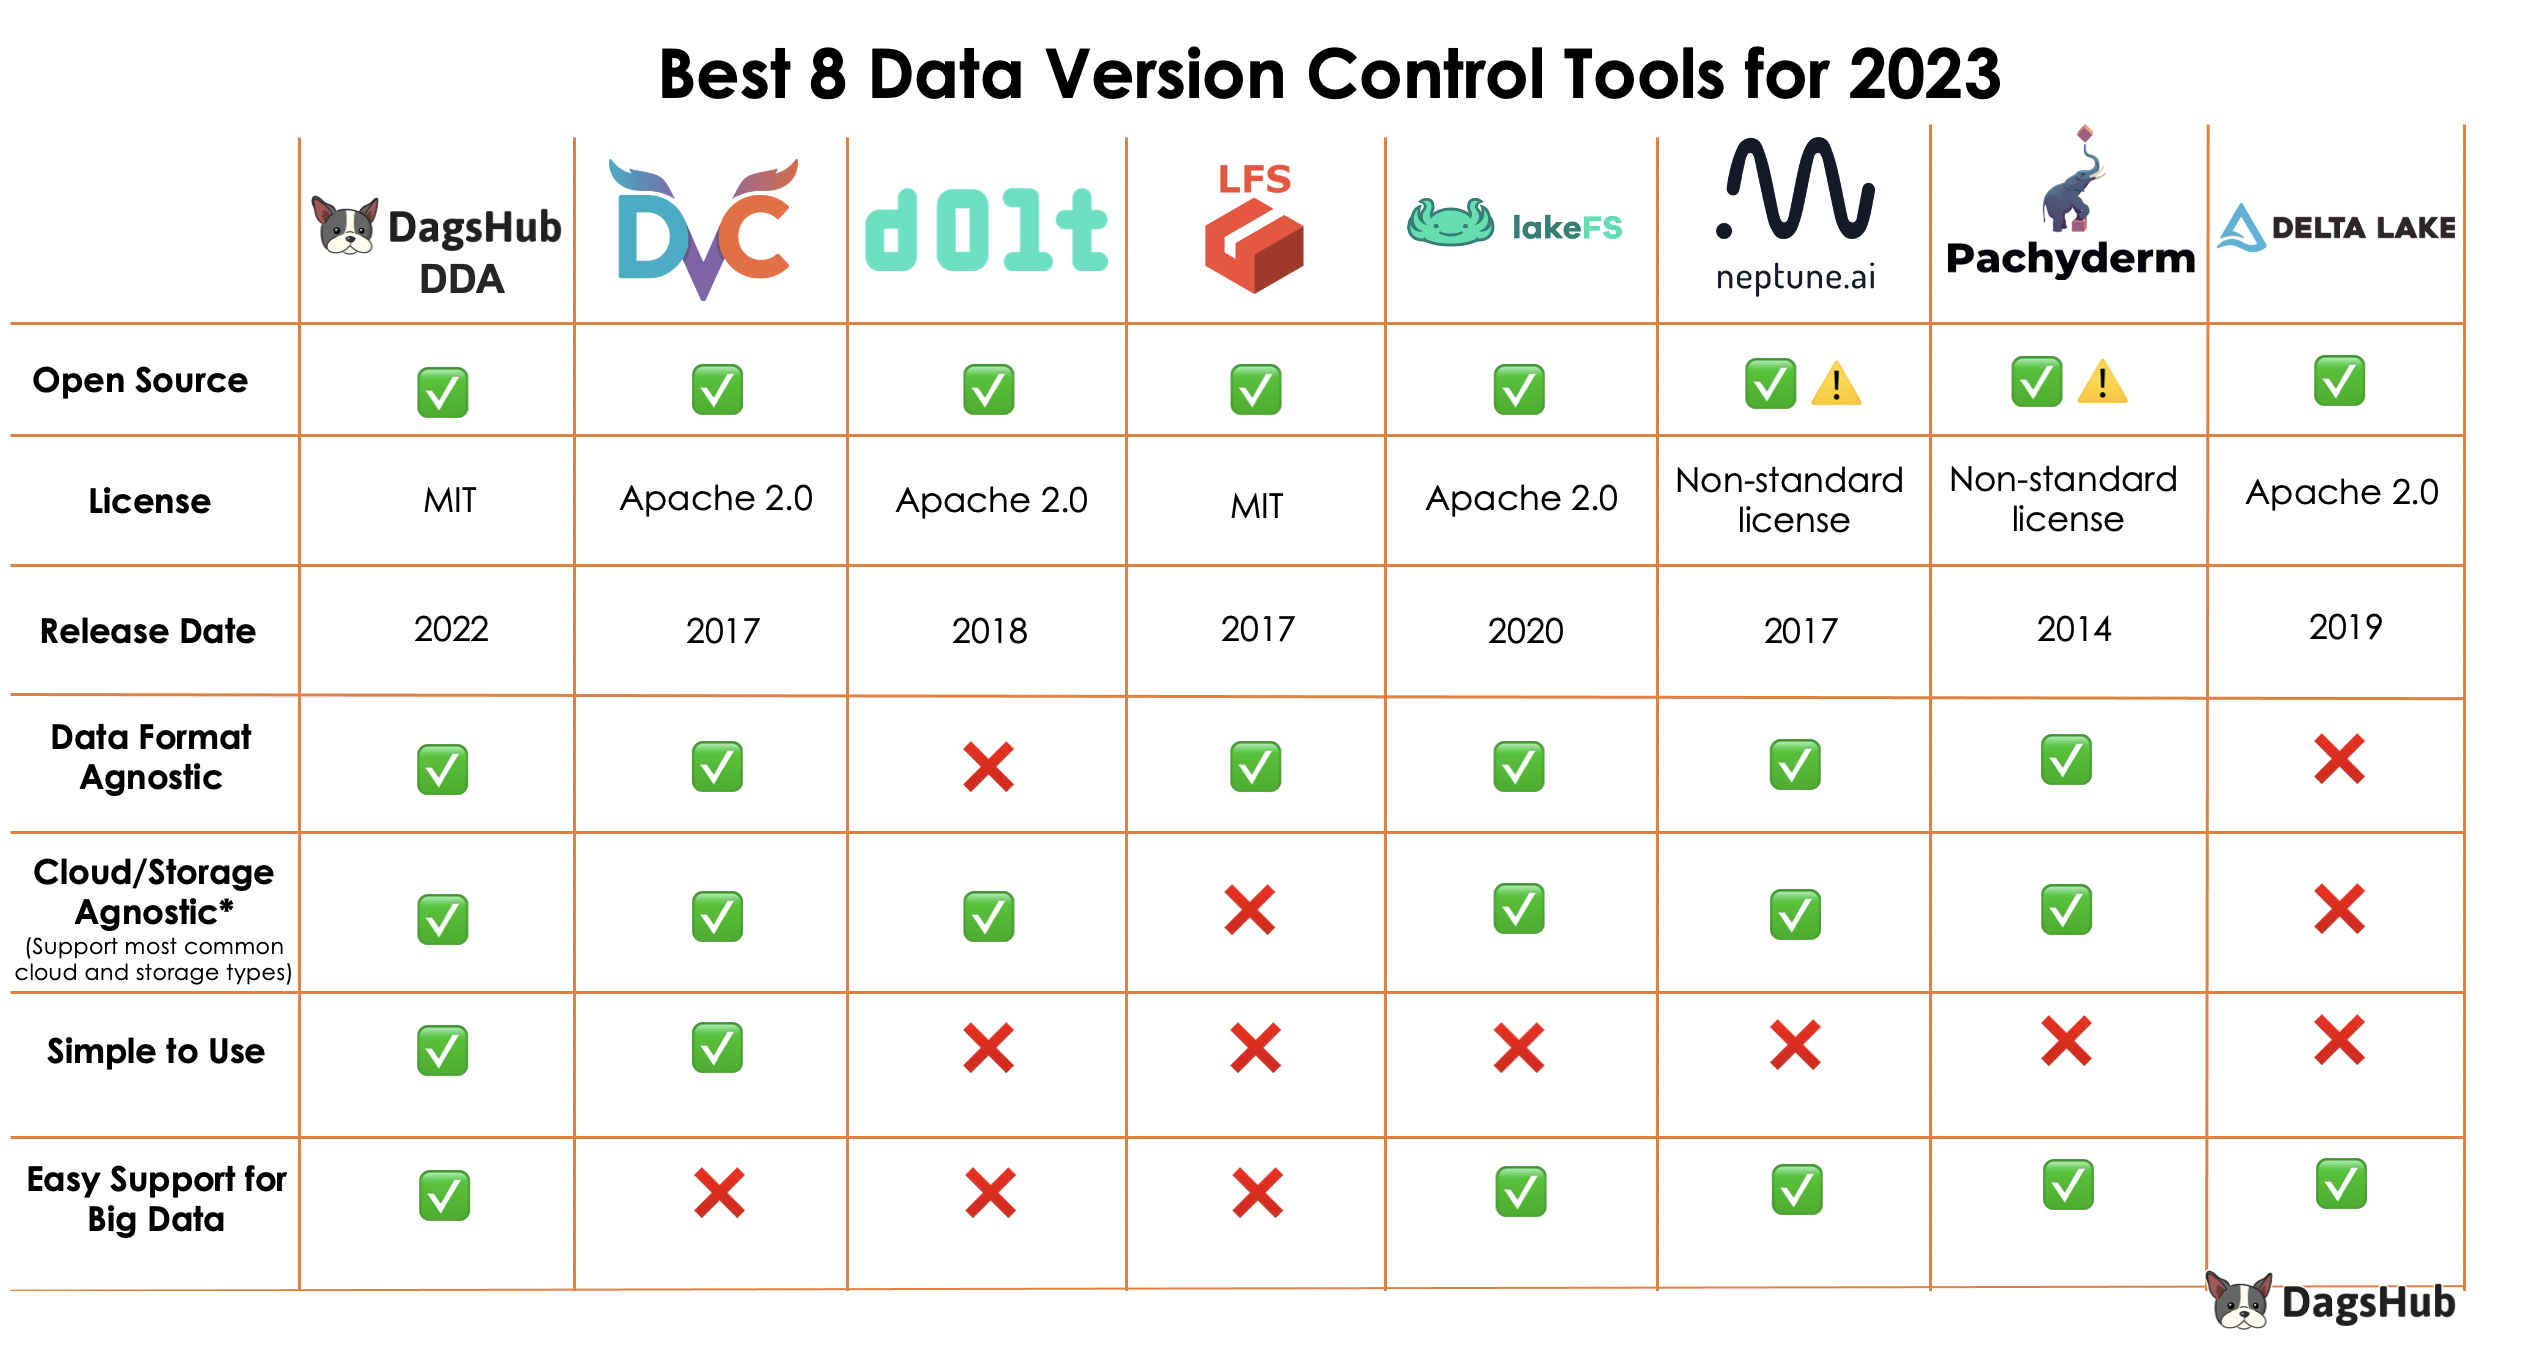 Best 8 Data Version Control Tools for Machine Learning 2023 | DagsHub